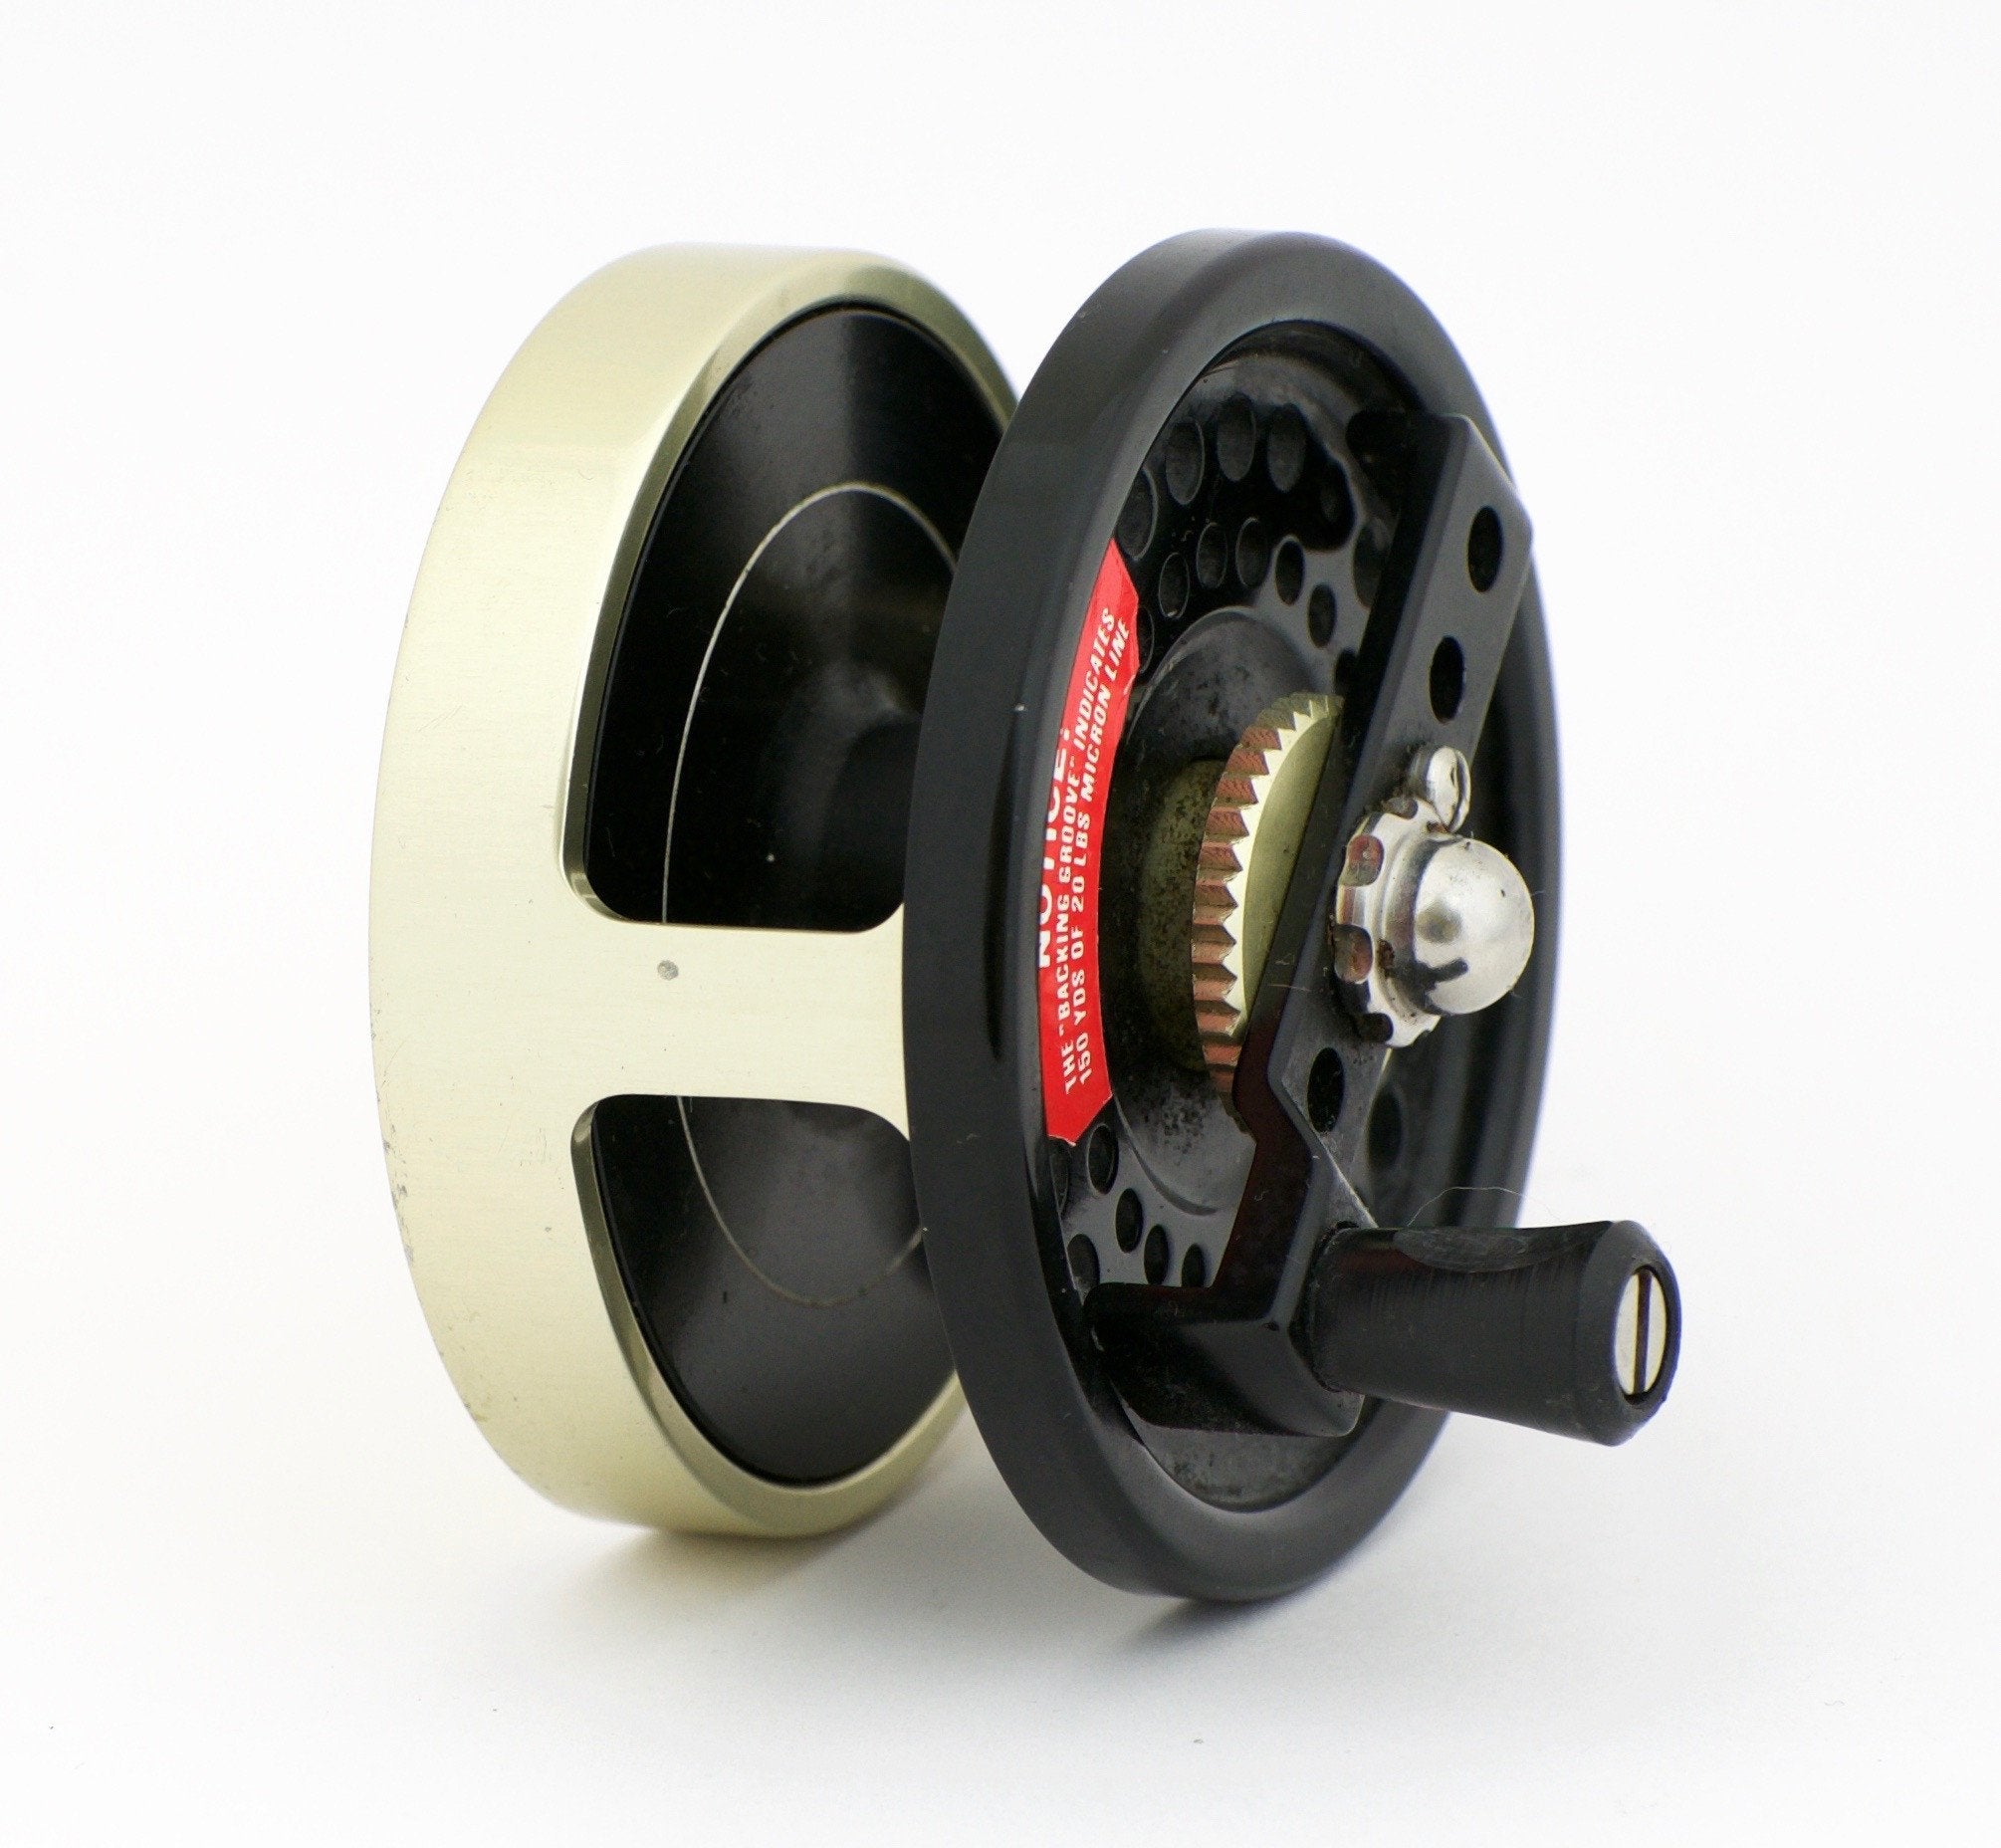 At Auction: Billy Pate Trout Reel